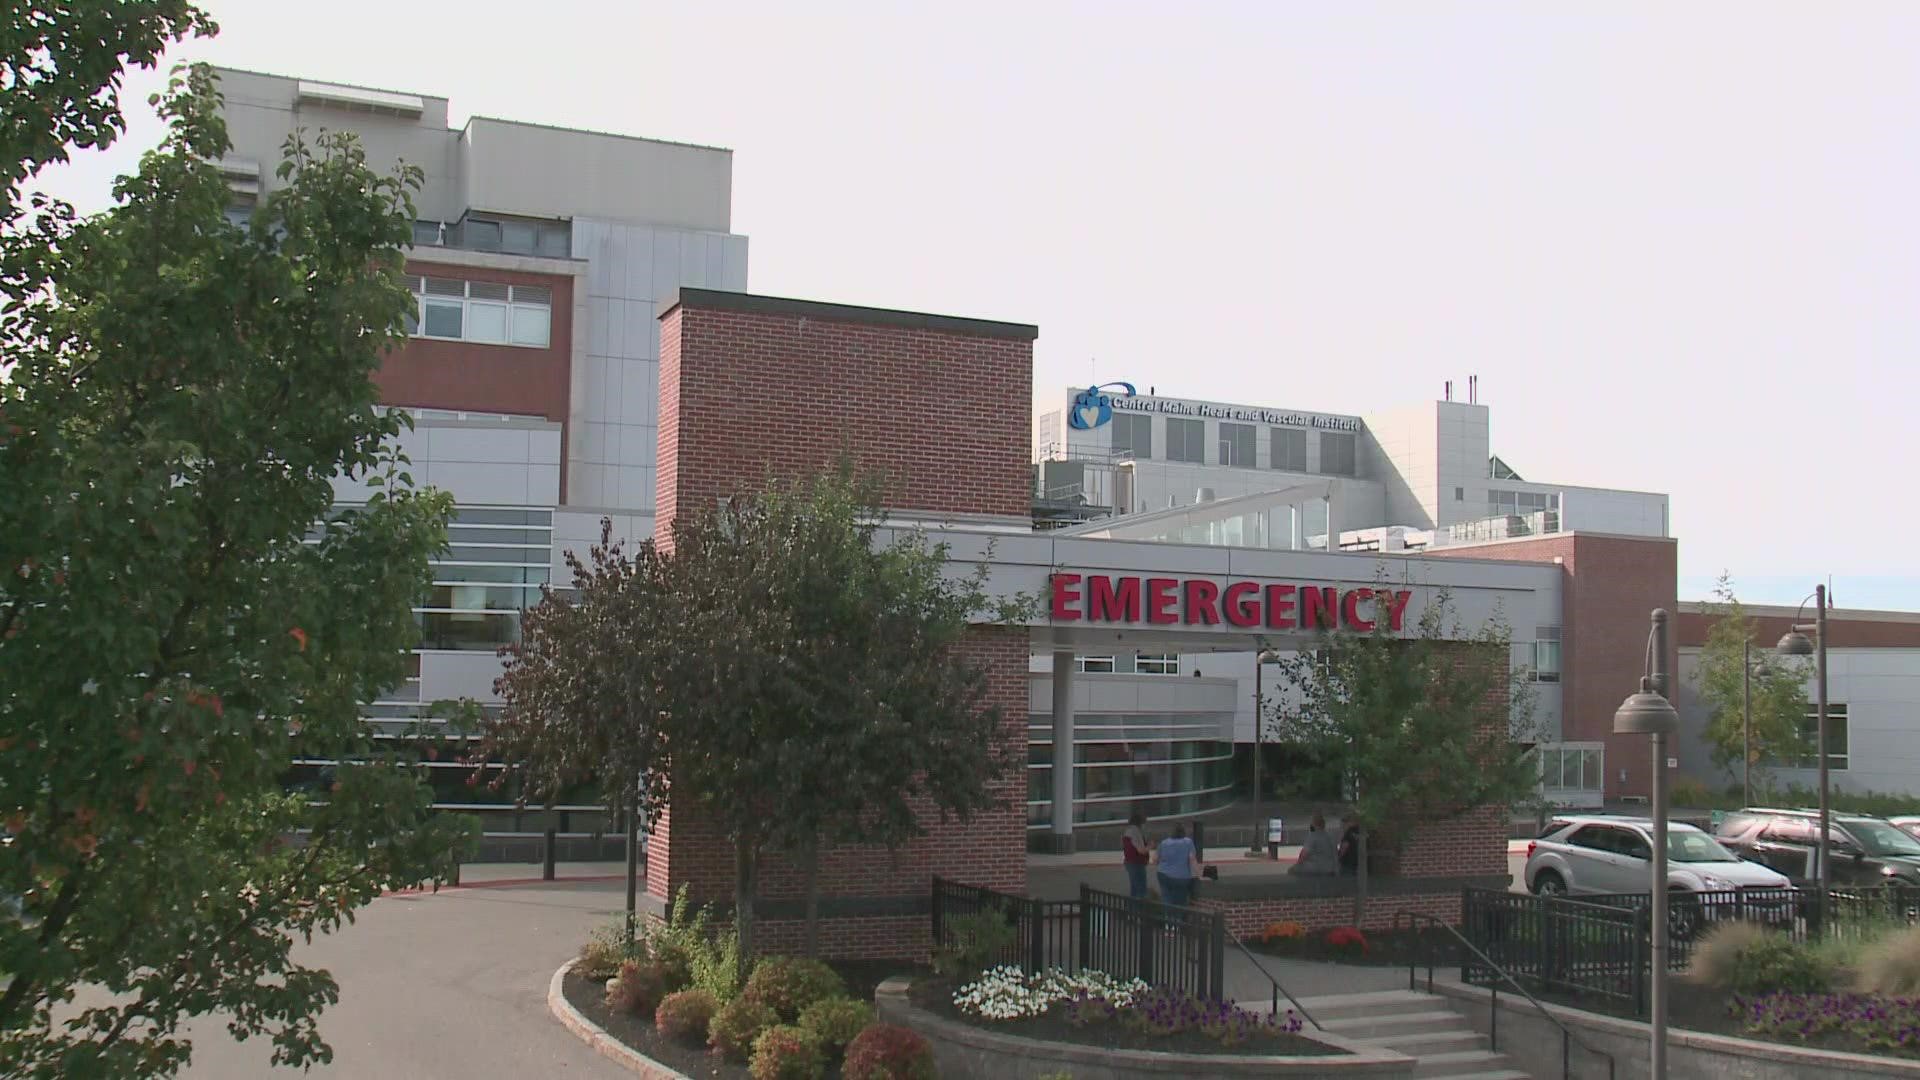 Patients who arrive at the CMMC Emergency Department for the listed conditions will be evaluated, stabilized, and taken to another facility for treatment if needed.